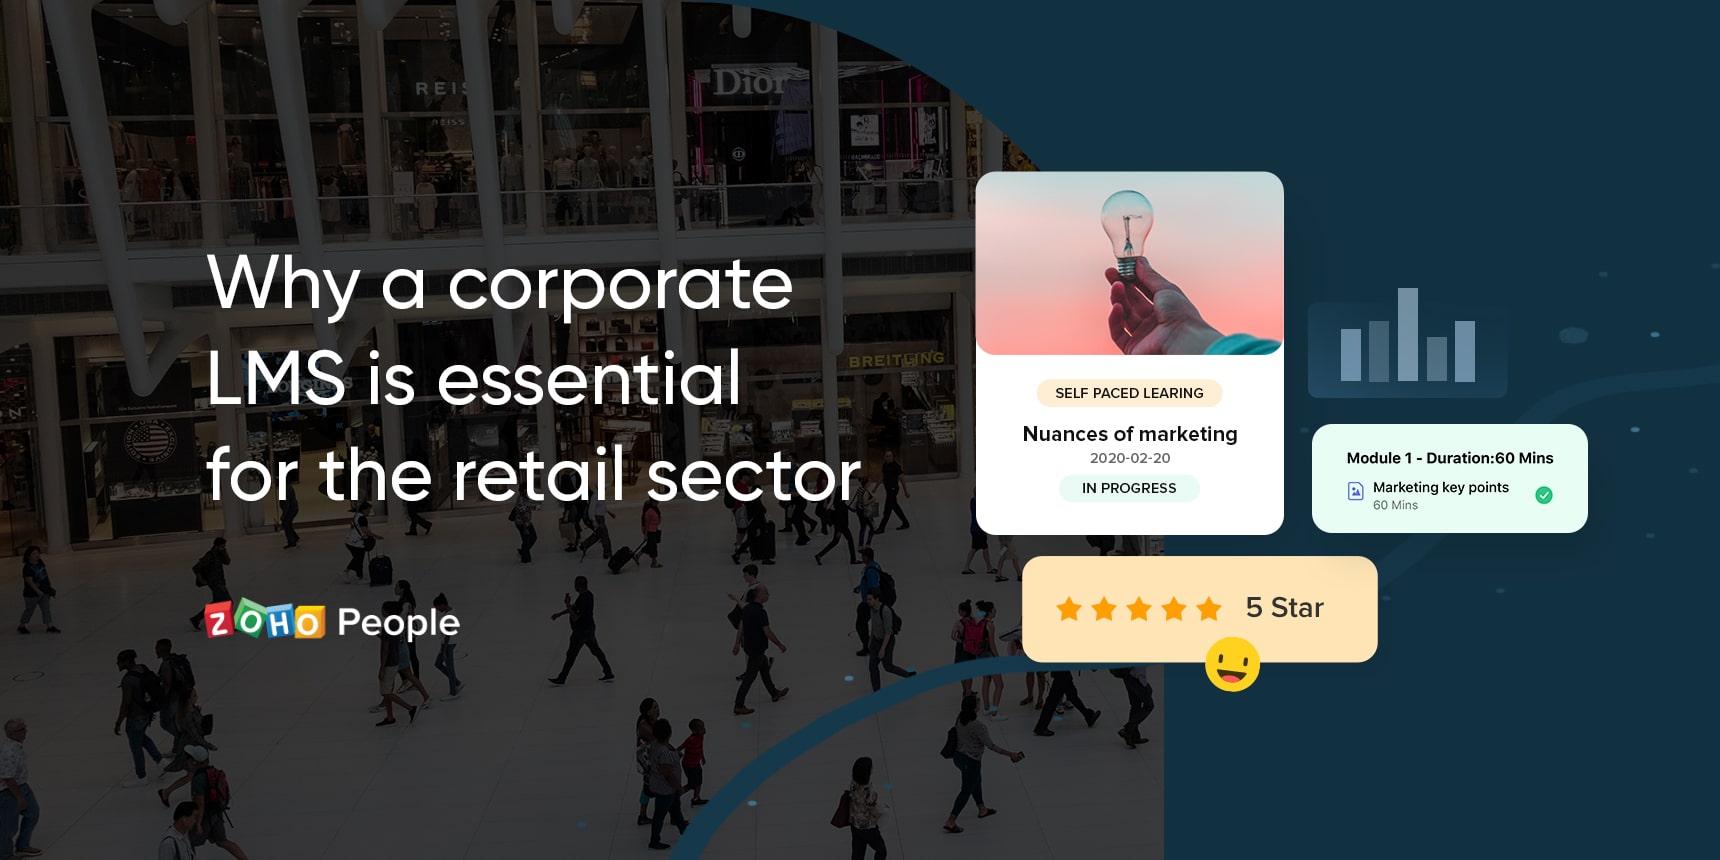 Corporate LMS for retail sector